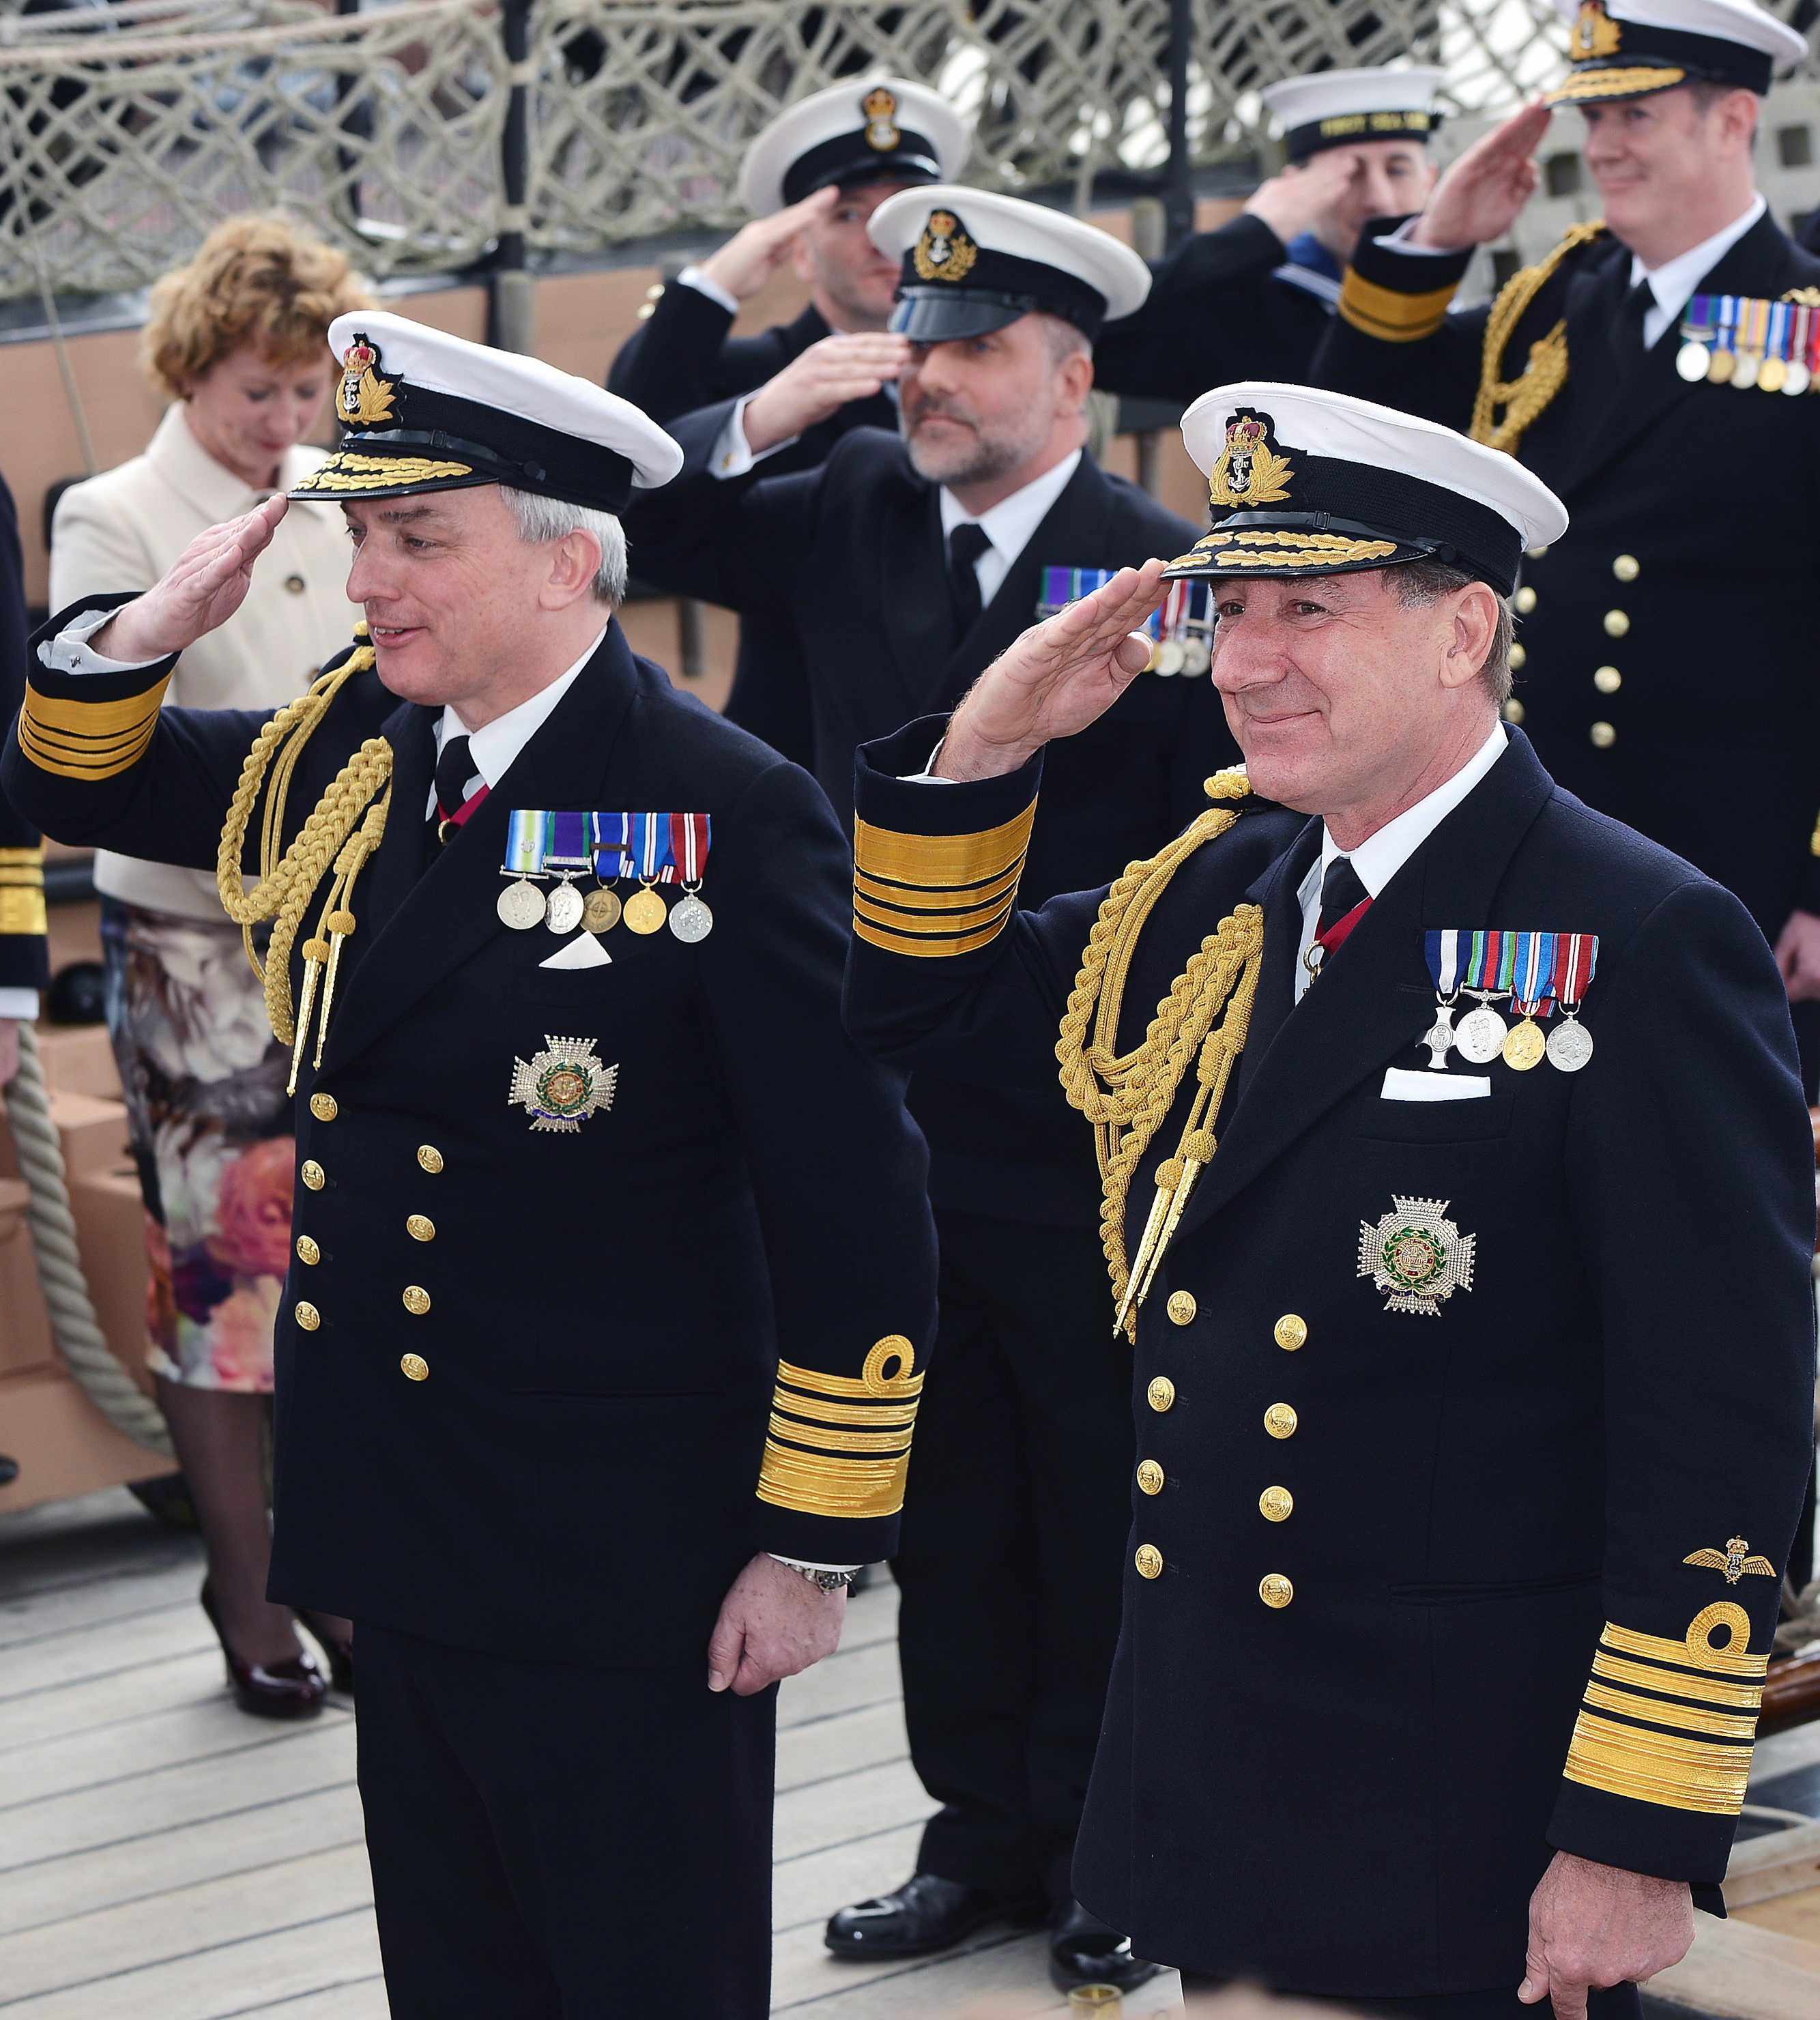 ADMIRAL SIR PHILIP JONES REFLECTS ON NAVY’S BRIGHT FUTURE AS HE TAKES OVER AS FIRST SEA LORD FROM ADMIRAL SIR GEORGE ZAMBELLAS Pictured - Admiral Sir George Zambellas right and Admiral Sir Philip Jones. The torch of Naval leadership today [Friday April 8] changed hands as Admiral Sir Philip Jones took over as Britain’s senior sailor and his predecessor, Admiral Sir George Zambellas, stepped down after 35 years’ serving his nation. In the great cabin of the world’s oldest commissioned warship, HMS Victory, Admiral Zambellas formally handed over command of more than 30,000 men and women, nearly 90 warships, nuclear submarines and support vessels, the helicopters and jets of the Fleet Air Arm and the elite Naval infantry of the Royal Marines to the man who has overseen the day-to-day operations of the Royal Navy since 2013 as its Fleet Commander. During his three-year spell in charge, Admiral Jones will oversee the aircraft carrier HMS Queen Elizabeth’s entry into service. Her sister ship, HMS Prince of Wales, will begin sea trials and the world’s most advanced fifth generation jet aircraft, the F-35B Joint Strike Fighter, will operate from a Royal Navy ship for the first time.